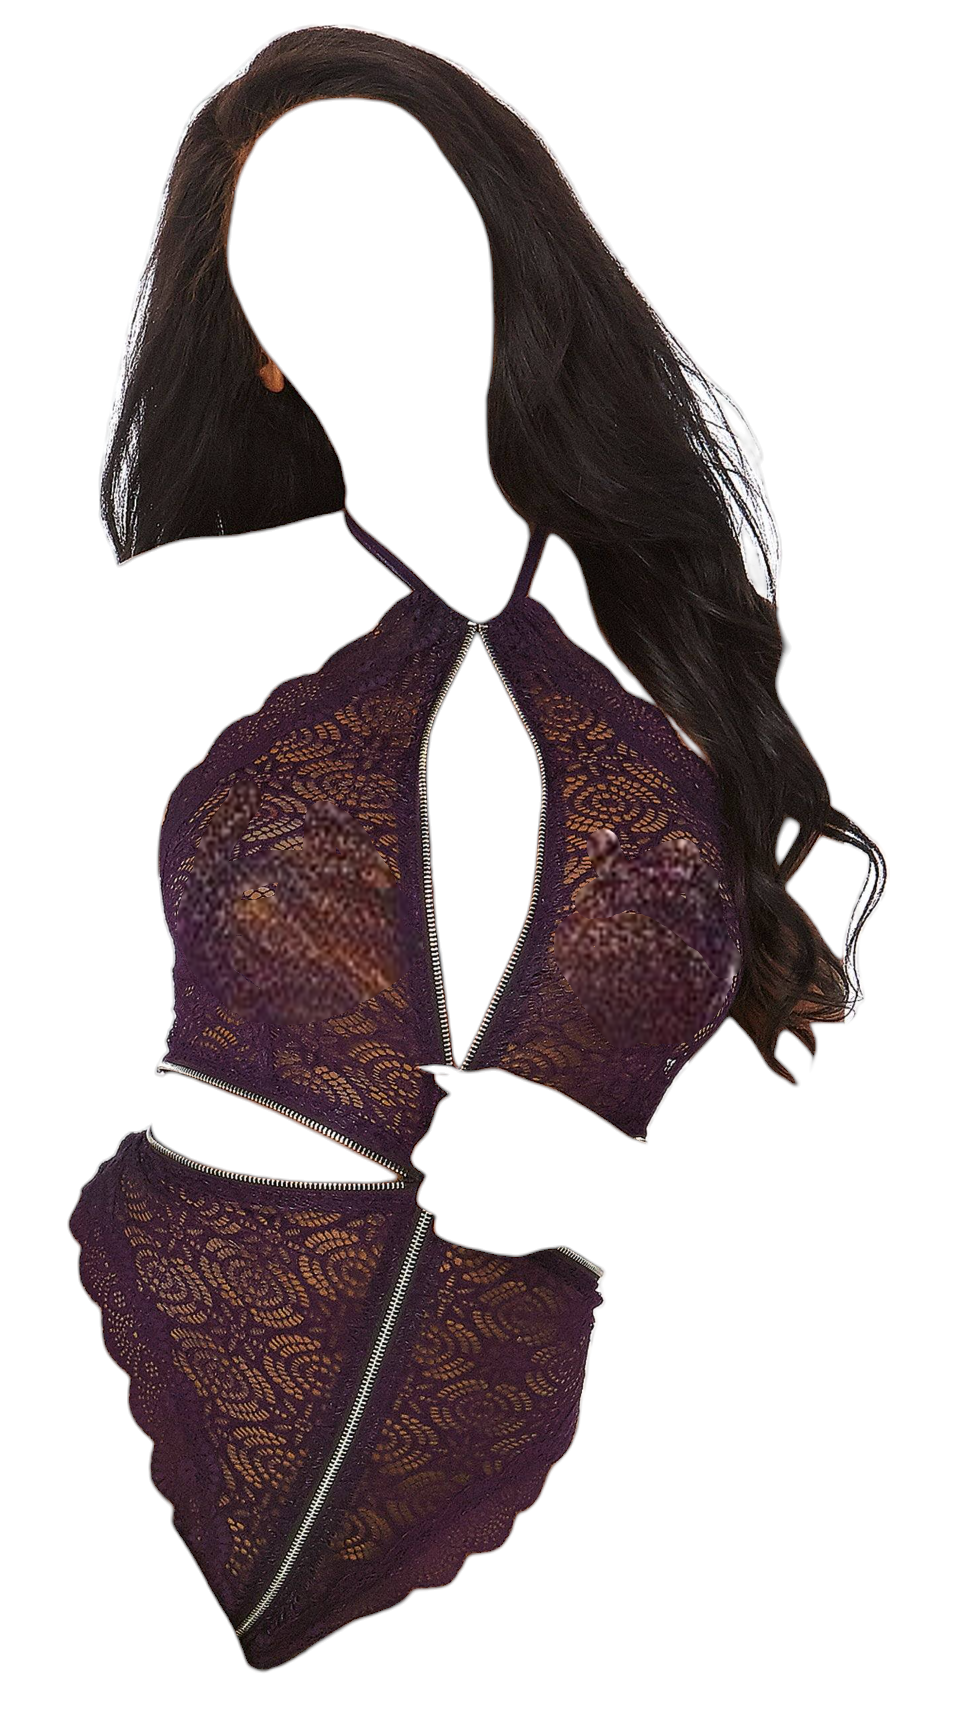 Dreamgirl Stretch Lace Halter Zippered Teddy With Scalloped Edge Trim Eggplant One Size